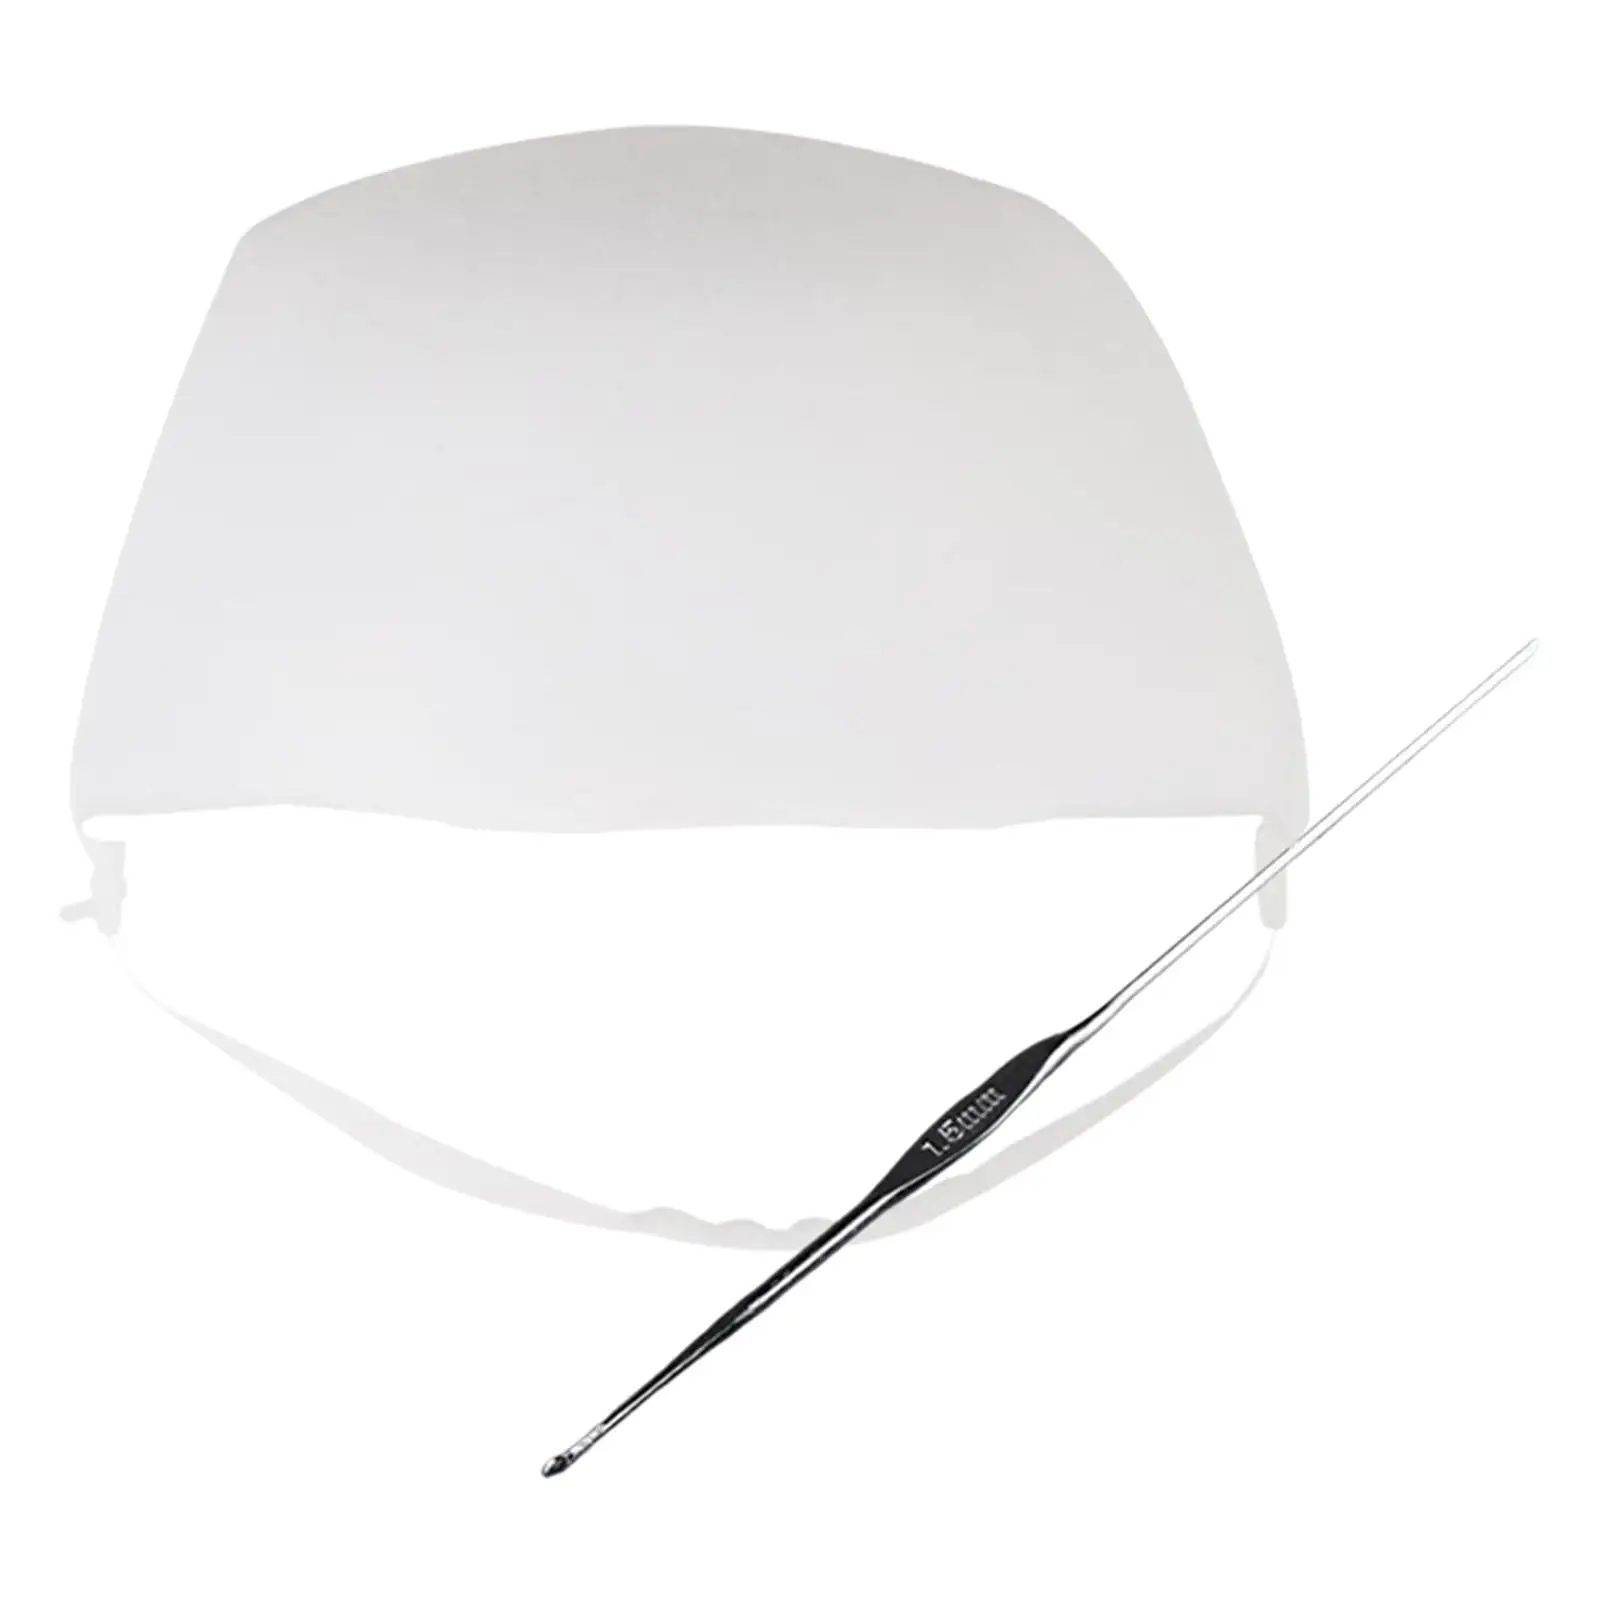 Silicone Hair Coloring Highlighting Hat with Needle White Binding Band Hair Dye Hat for Barber Salon Hair Styling Tools Women